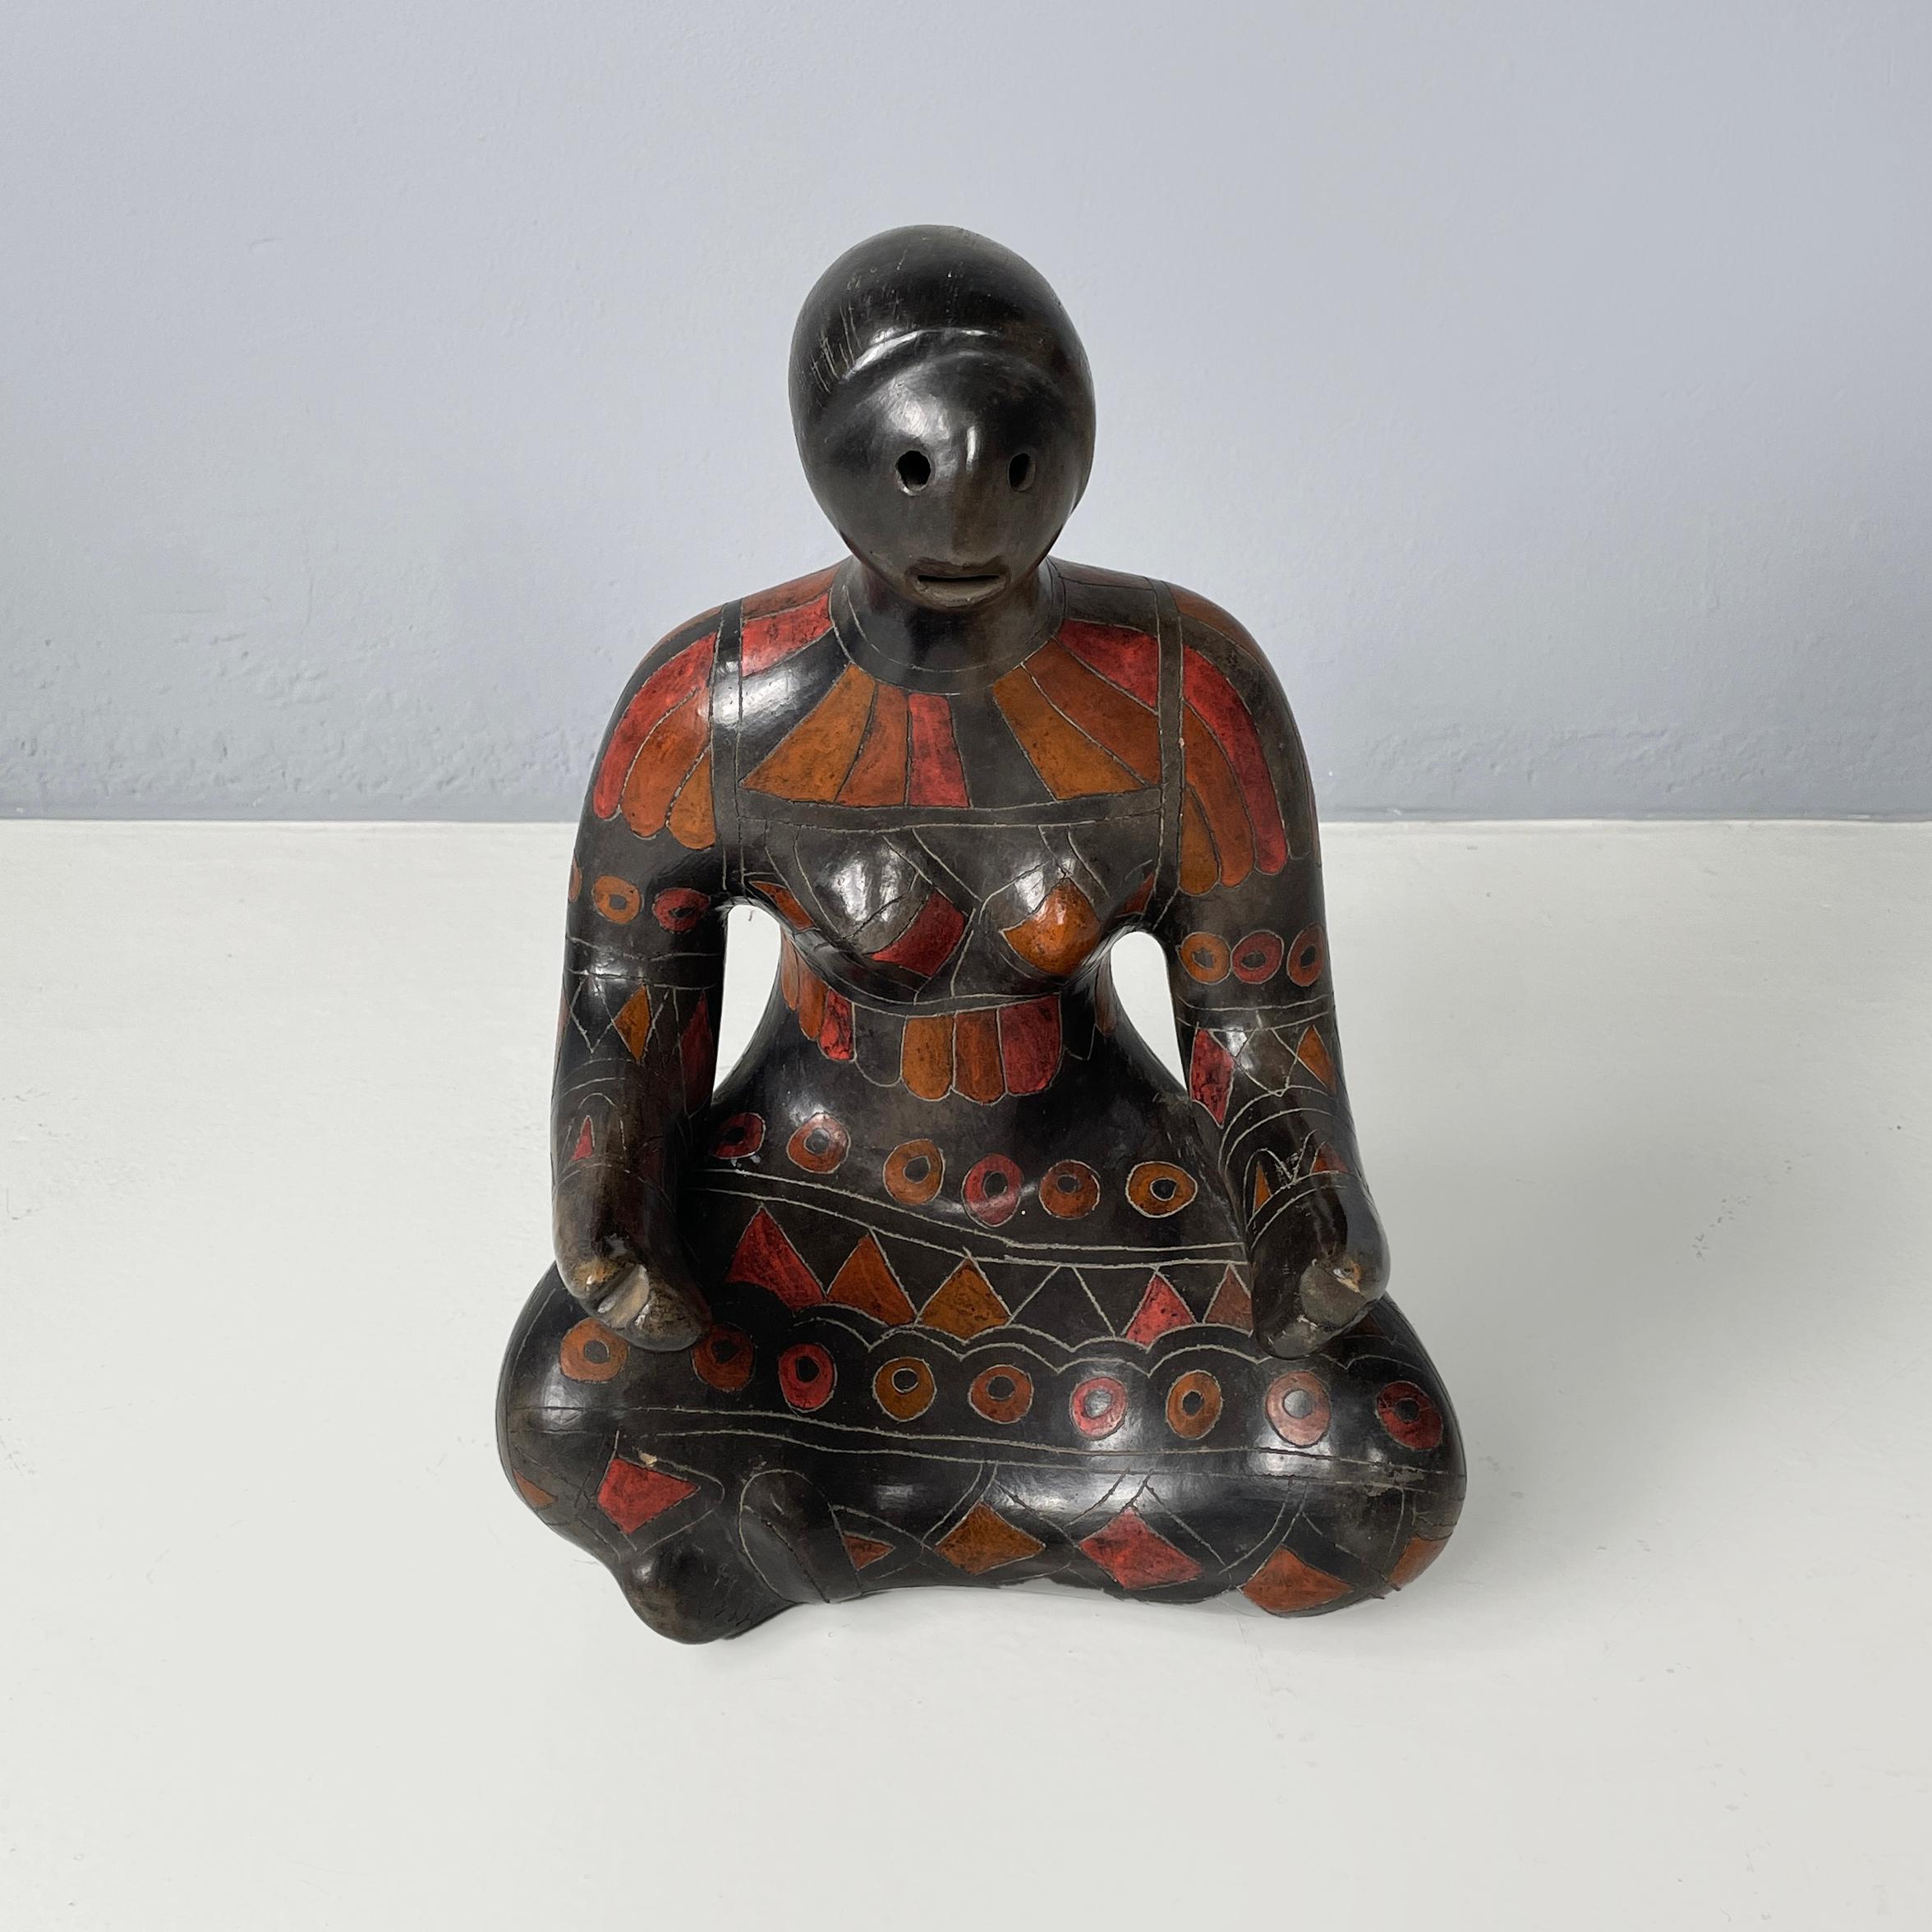 Mexican modern Terracotta sculpture of a woman by Manuel Felguerez, 1980s
Ethnic sculpture in terracotta painted in black and red. The subject is a woman with her hair tied in a braid and sitting cross-legged. Her dress is finished with geometric